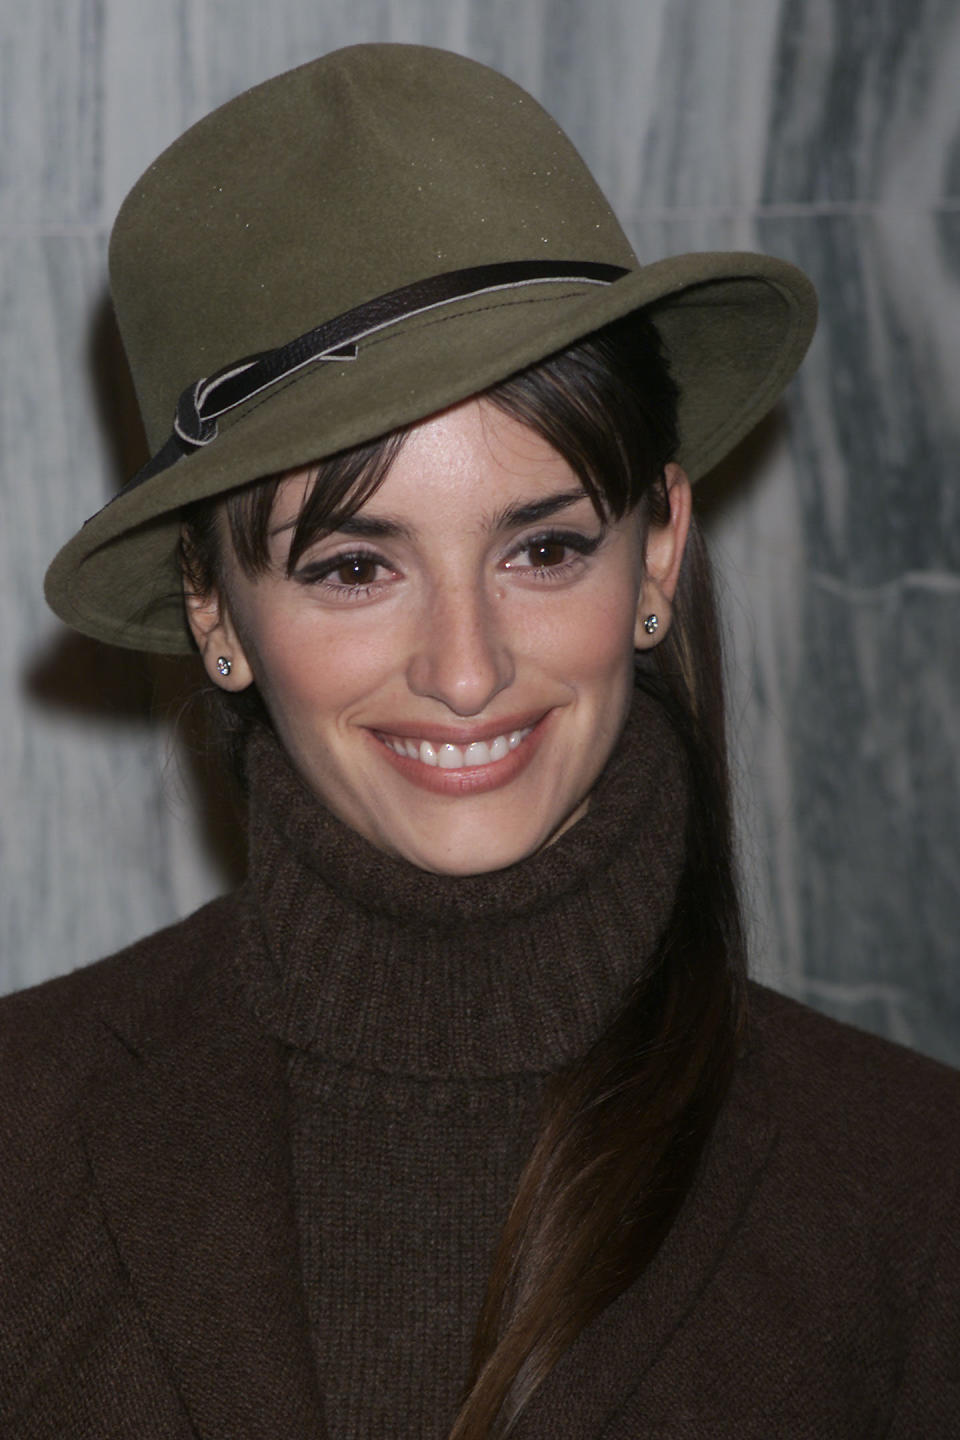 The actress sports a turtleneck at the premiere of "All The Pretty Horses" in New York in December 2000.